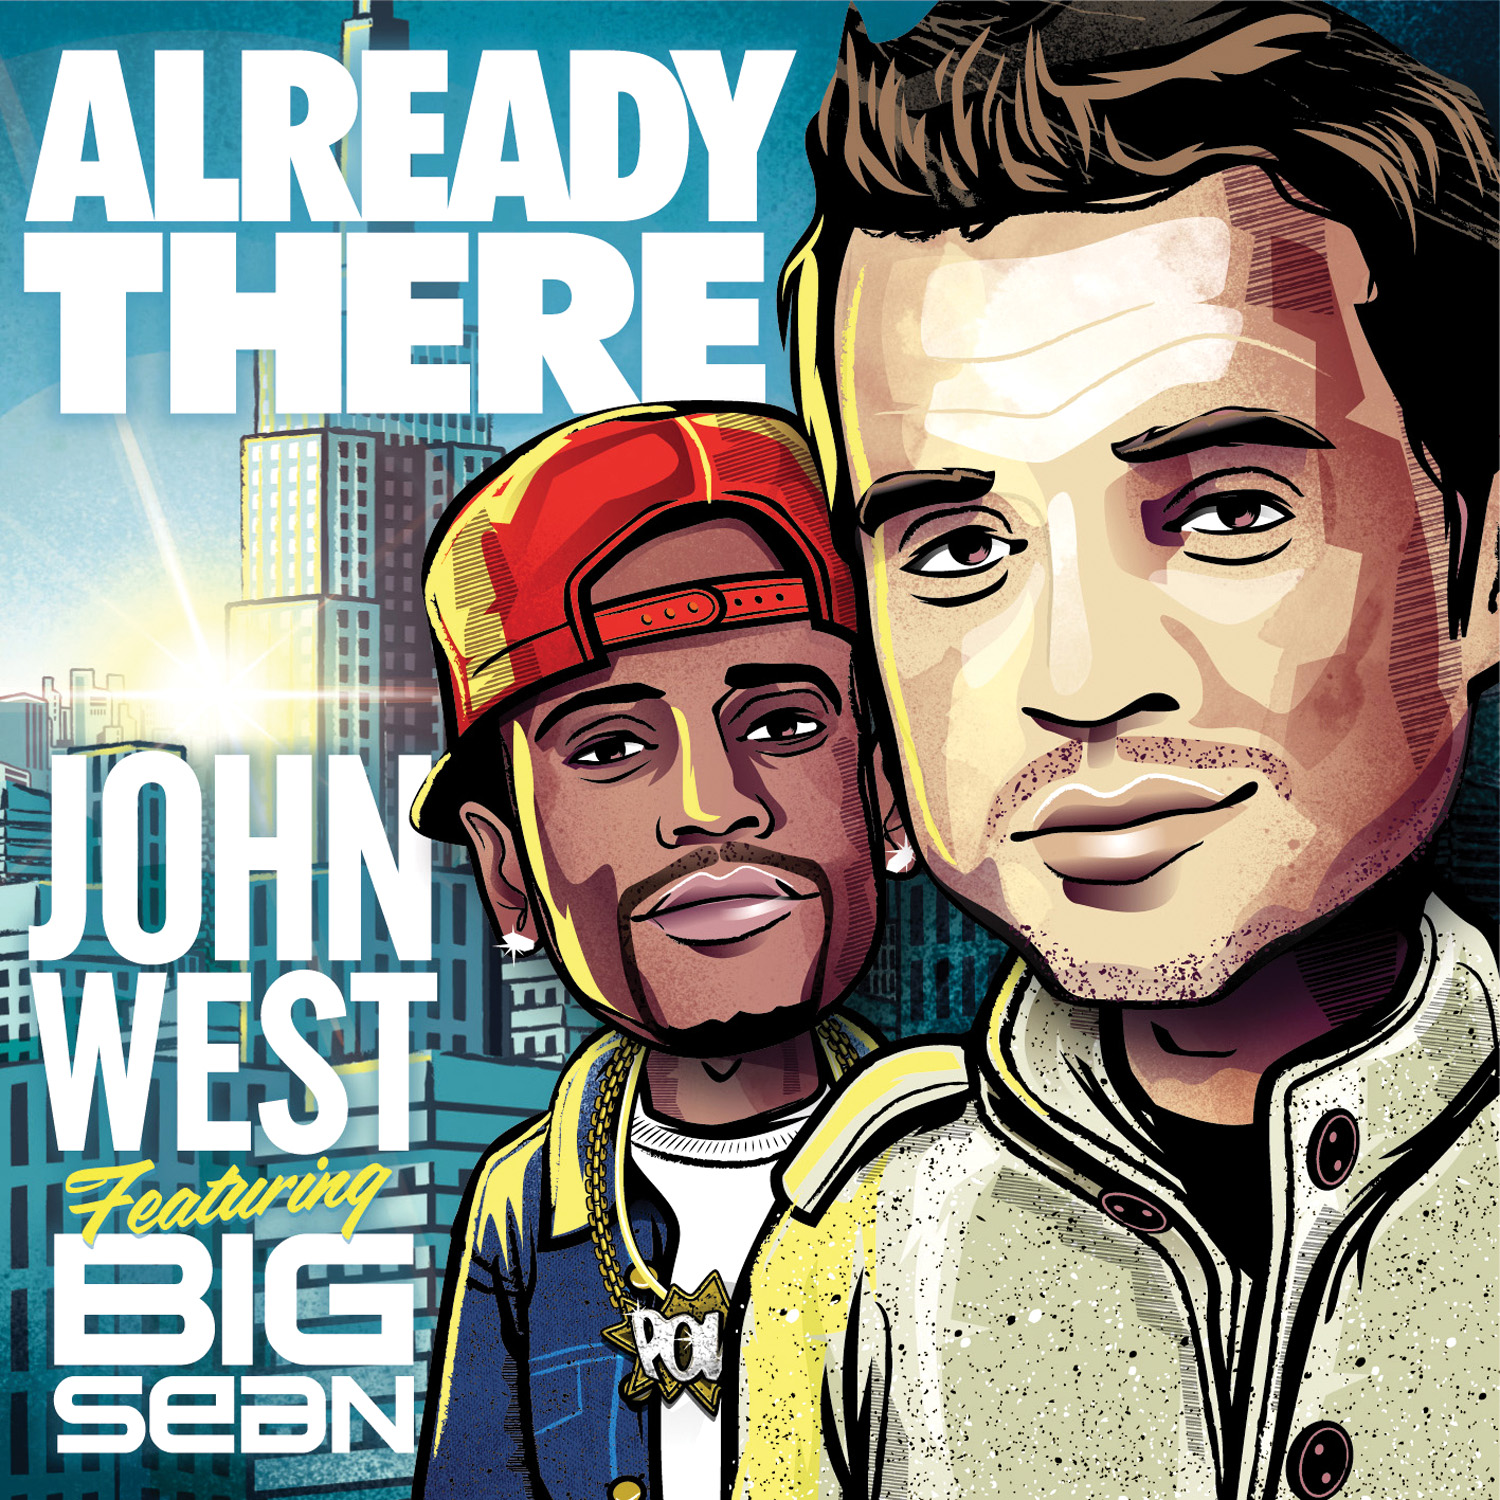 John West "Already There" featuring Big Sean